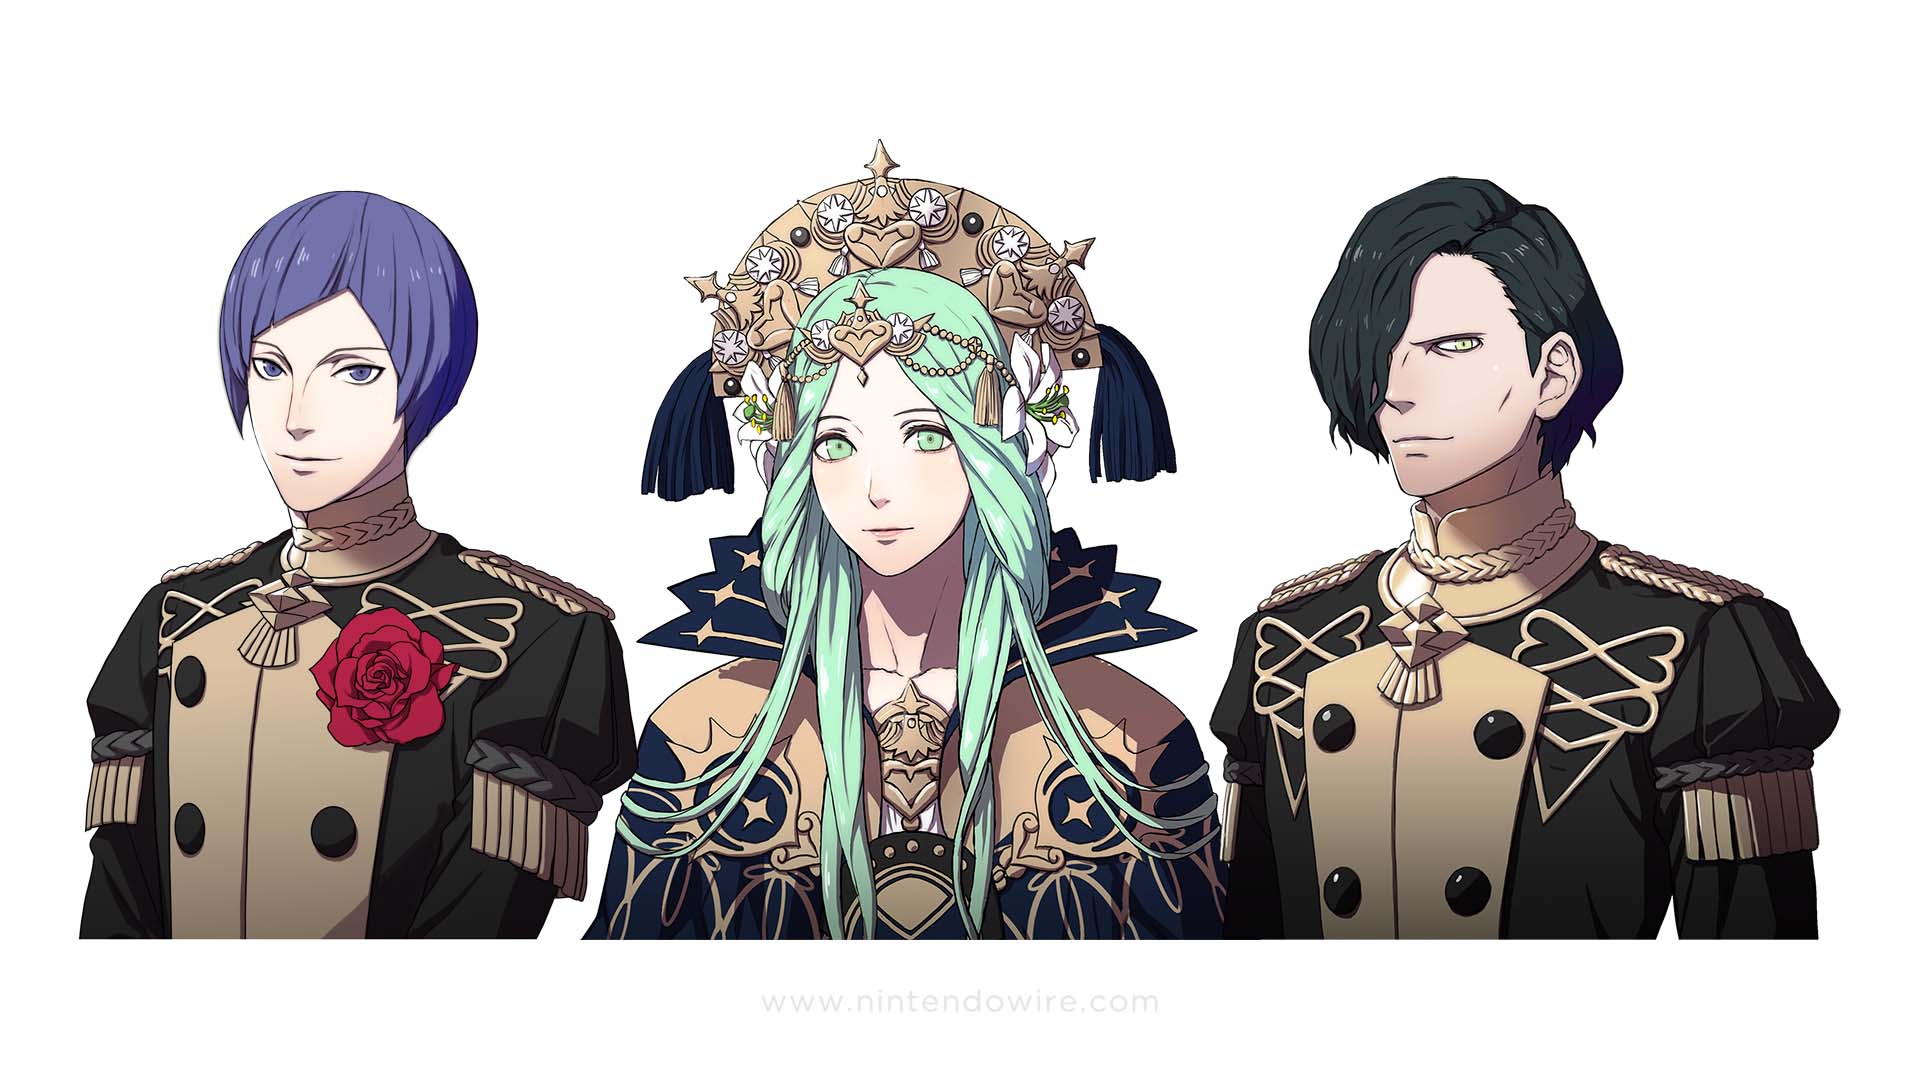 Fire Emblem: Three Houses introduces more of its sure to be sizable cast.